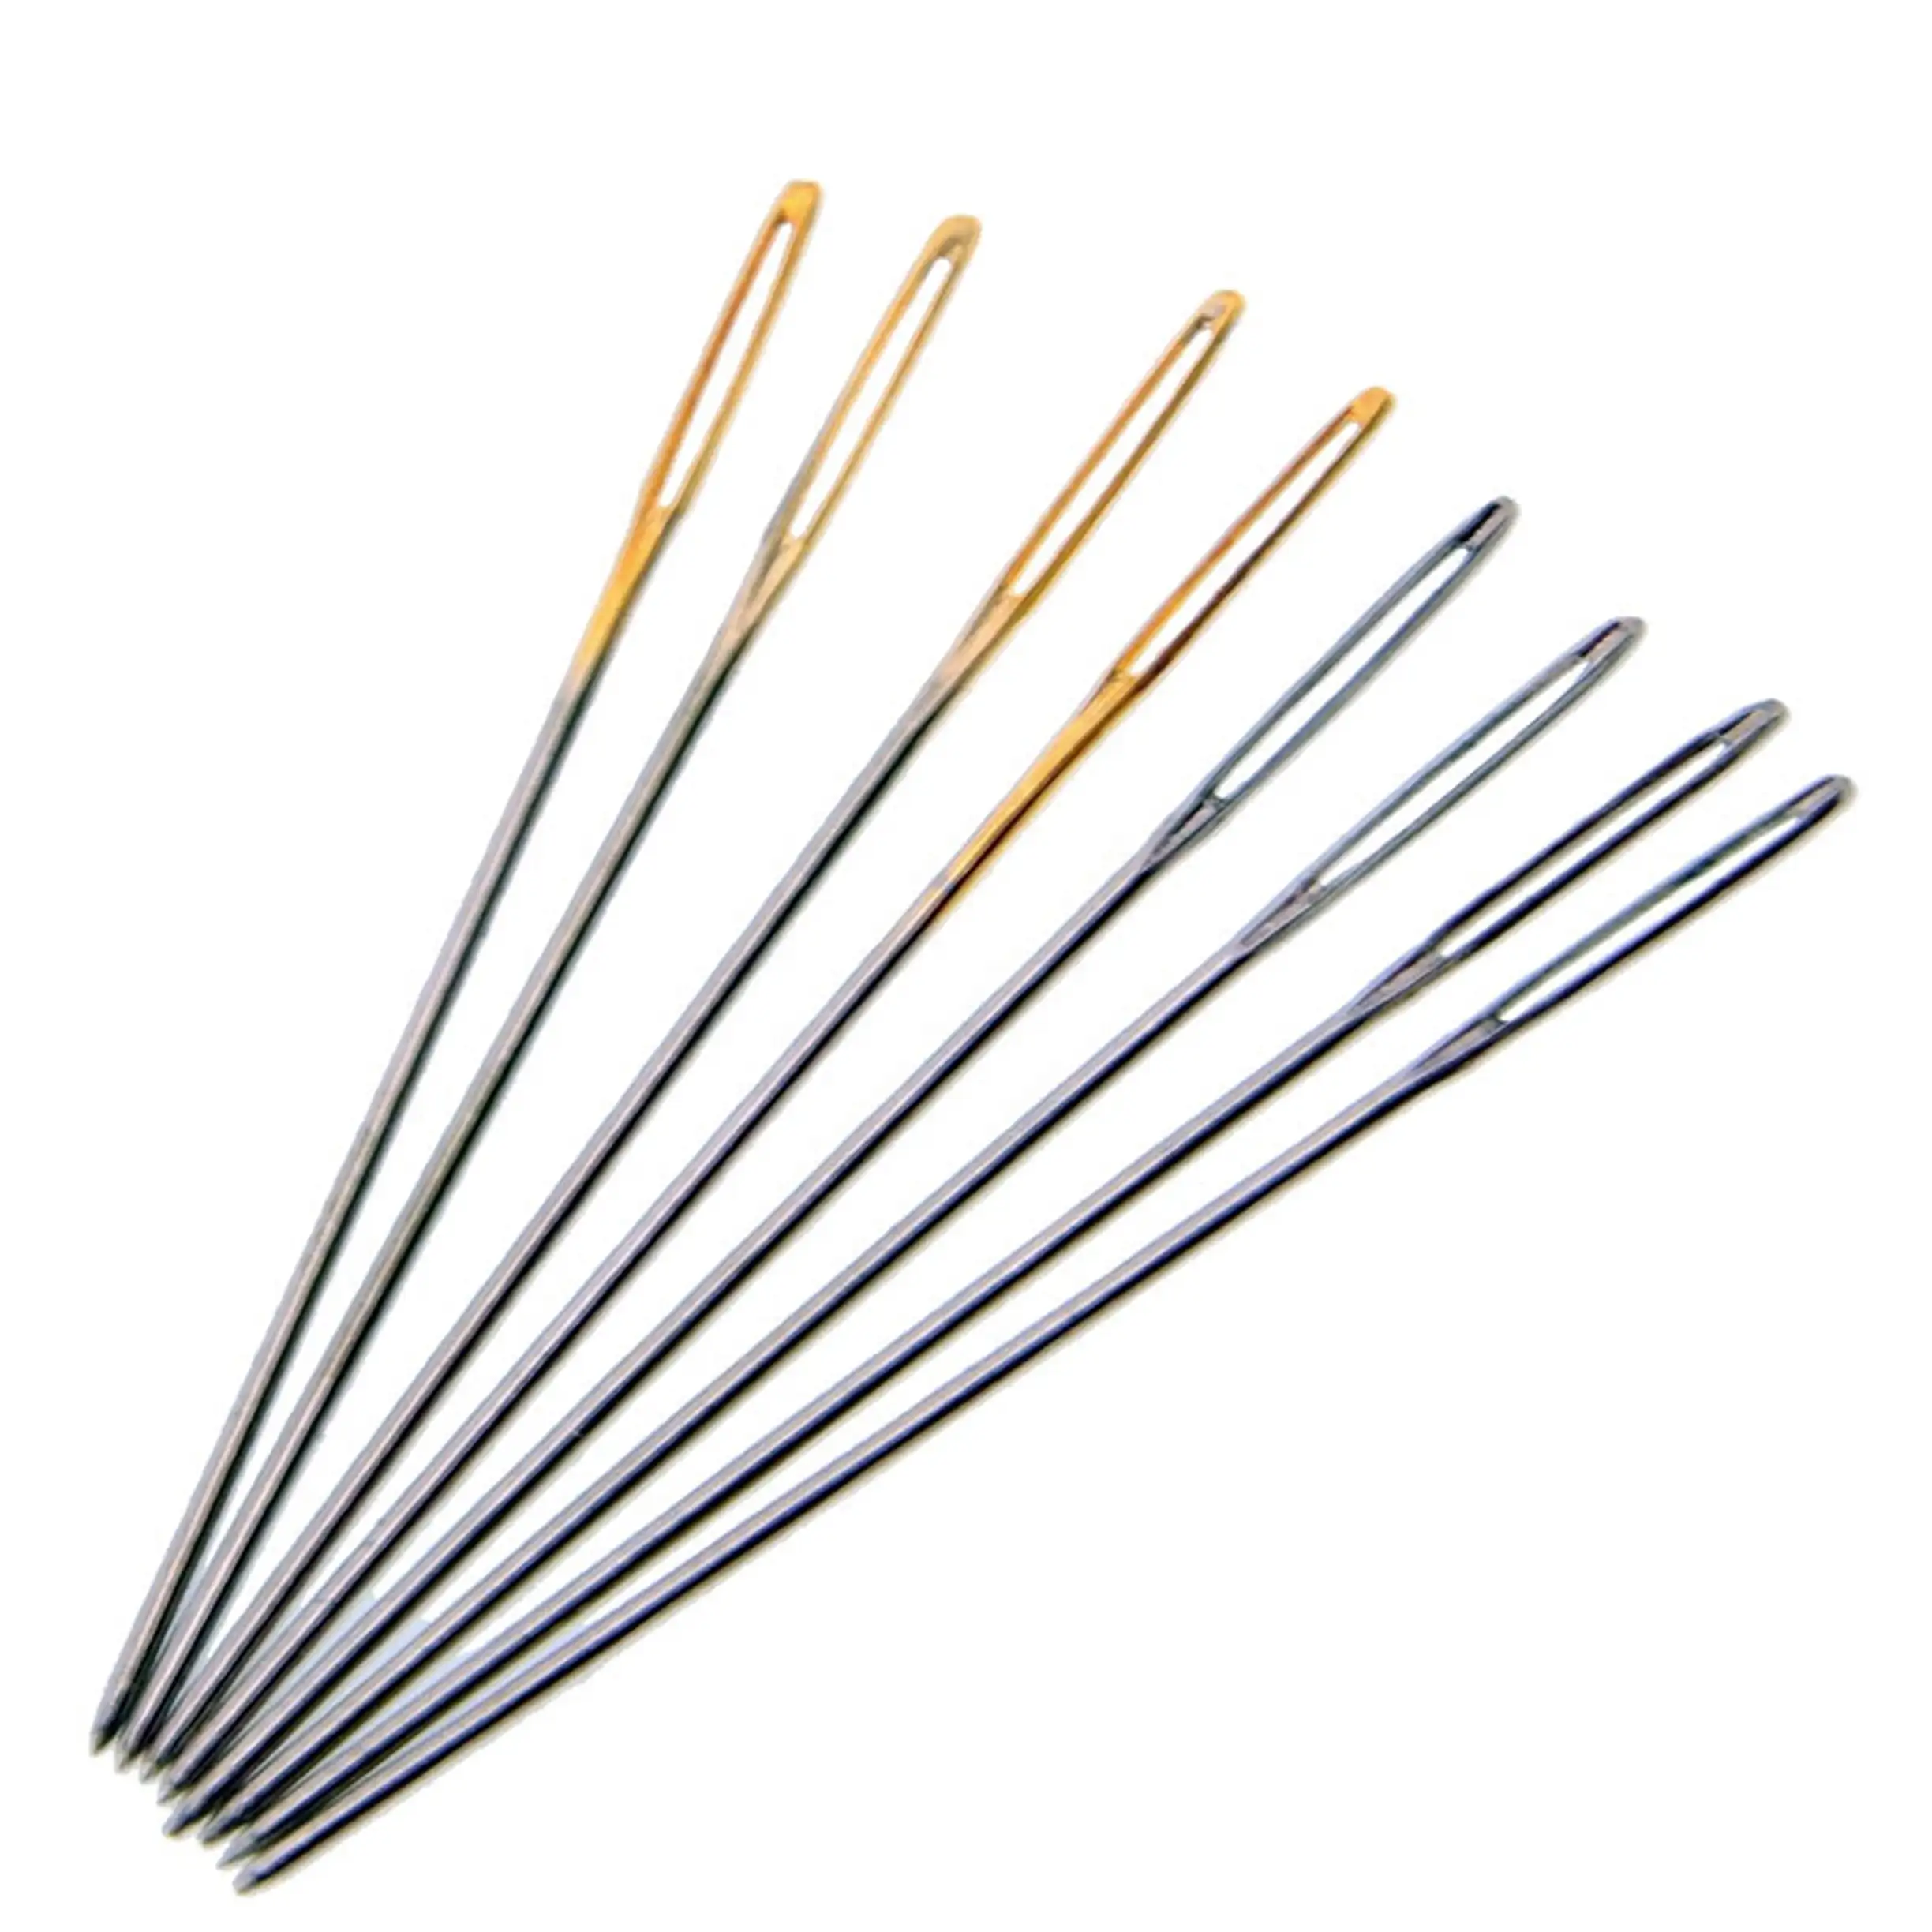 Large Eye Stitching Needles Embroidery Needles for Hand Sewing Thread Needles for DIY Craft Stitching Applique Embellishment